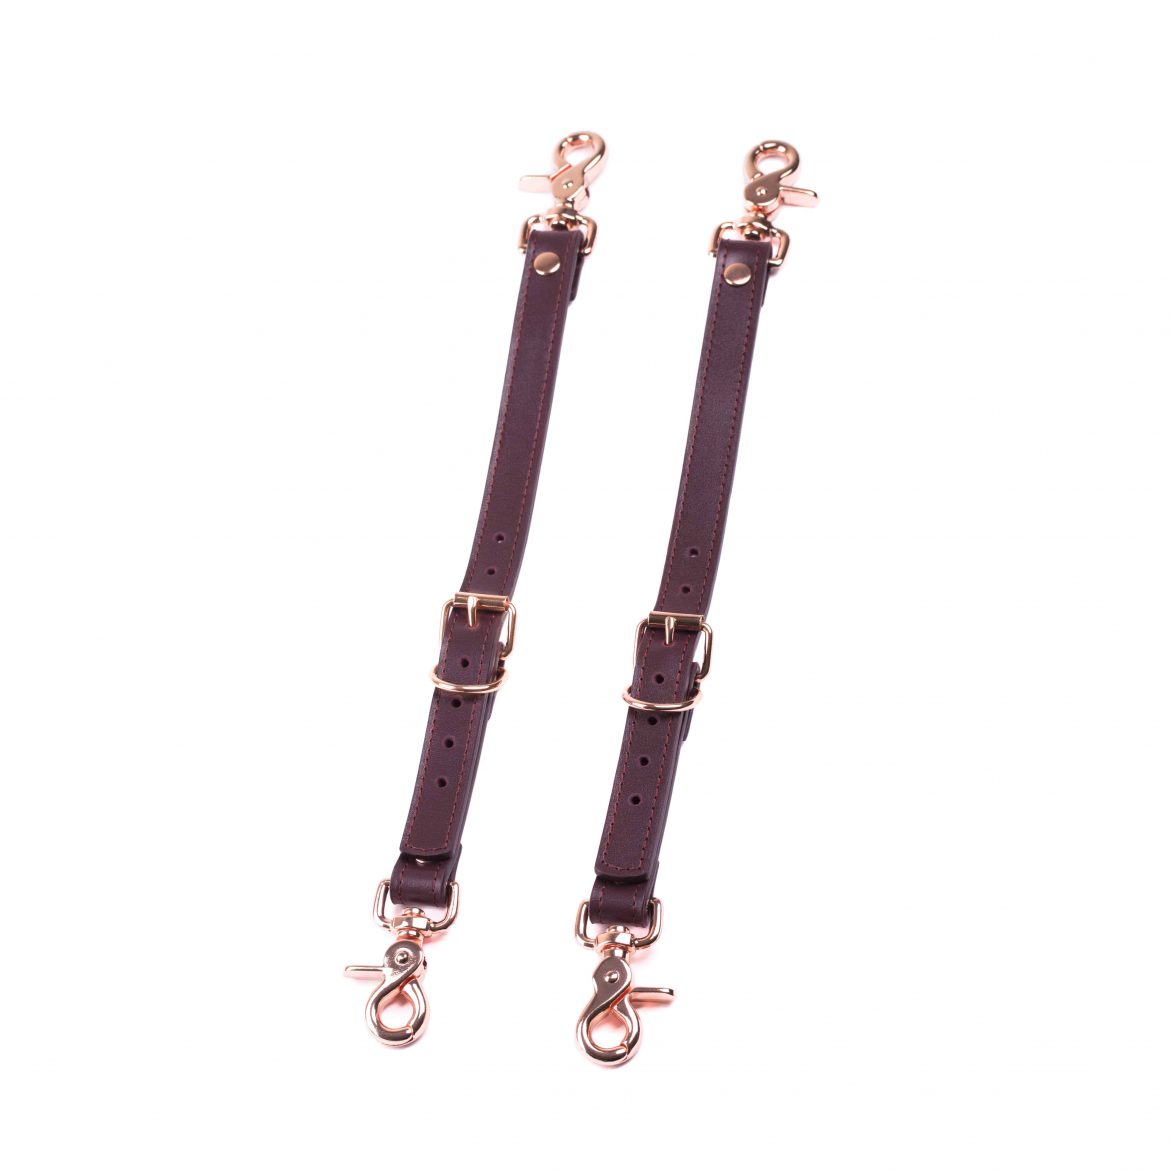 bdsm leather garter pair 9 scaled